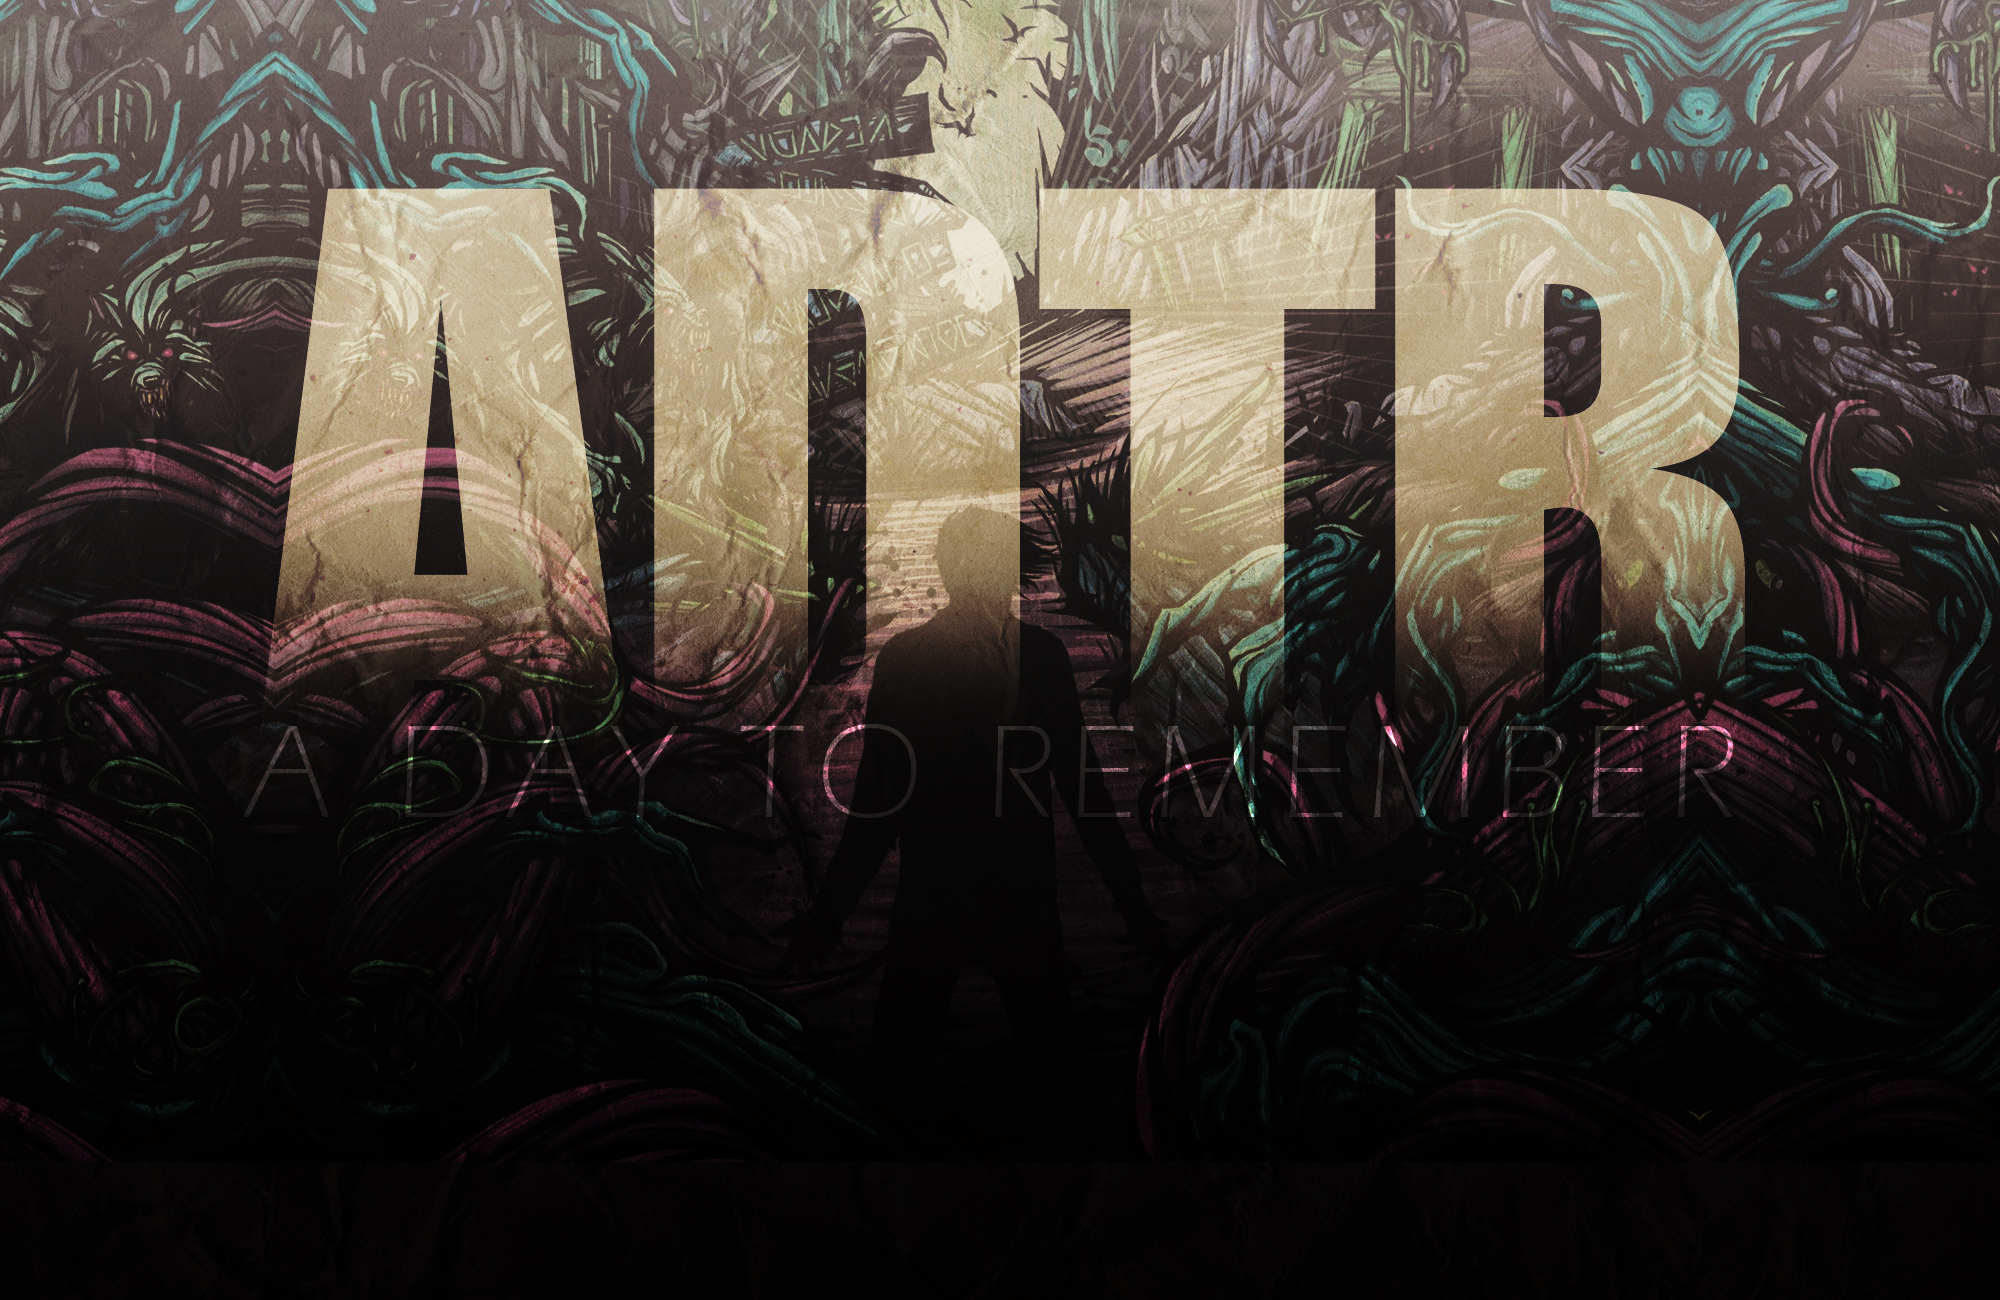 Anyone Have This Wallpaper Without The A Day To Remember Just Adtr